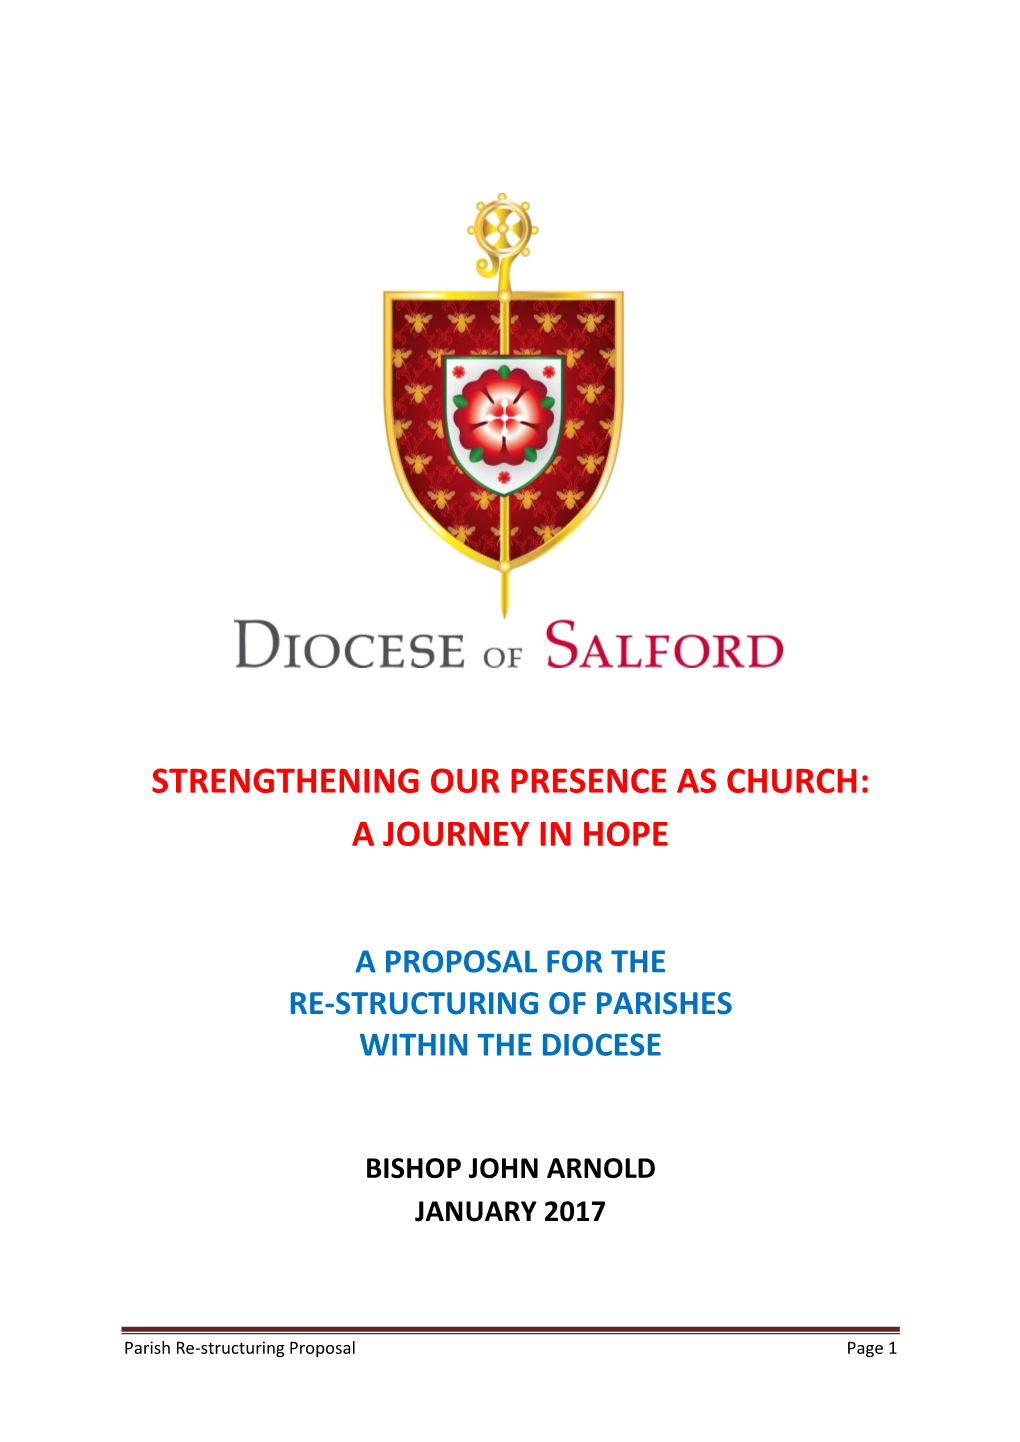 Strengthening Our Presence As Church: a Journey in Hope